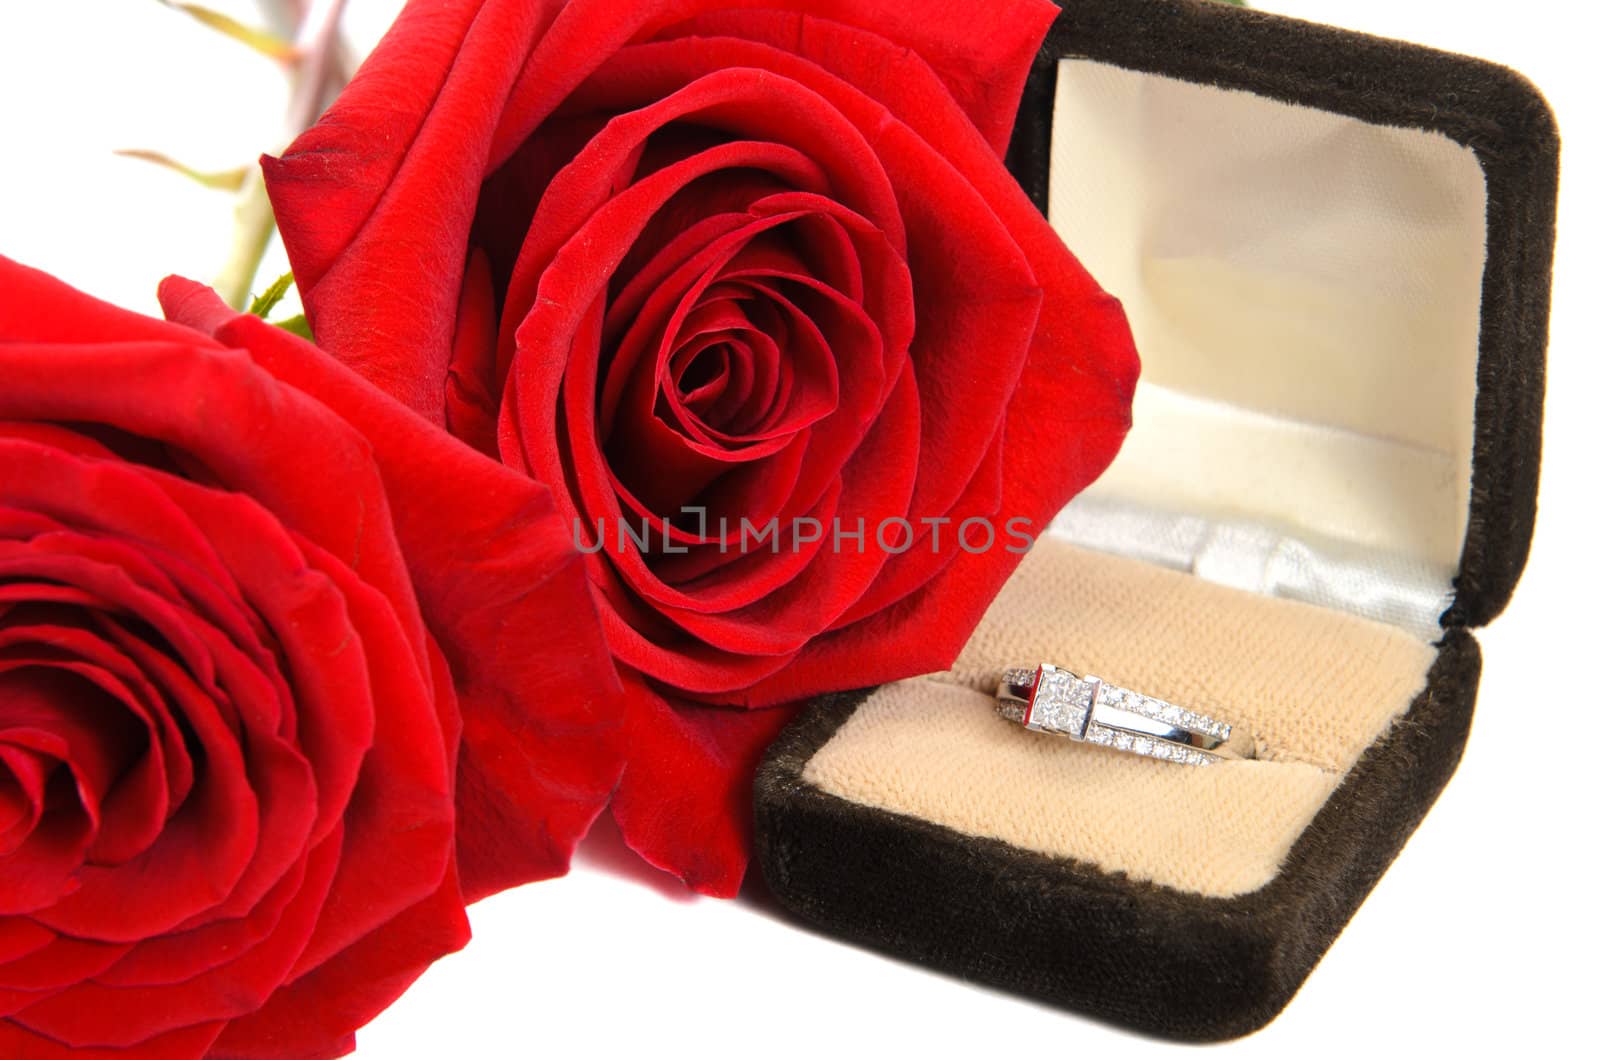 Diamond Ring Next to Two Red Roses by dragon_fang